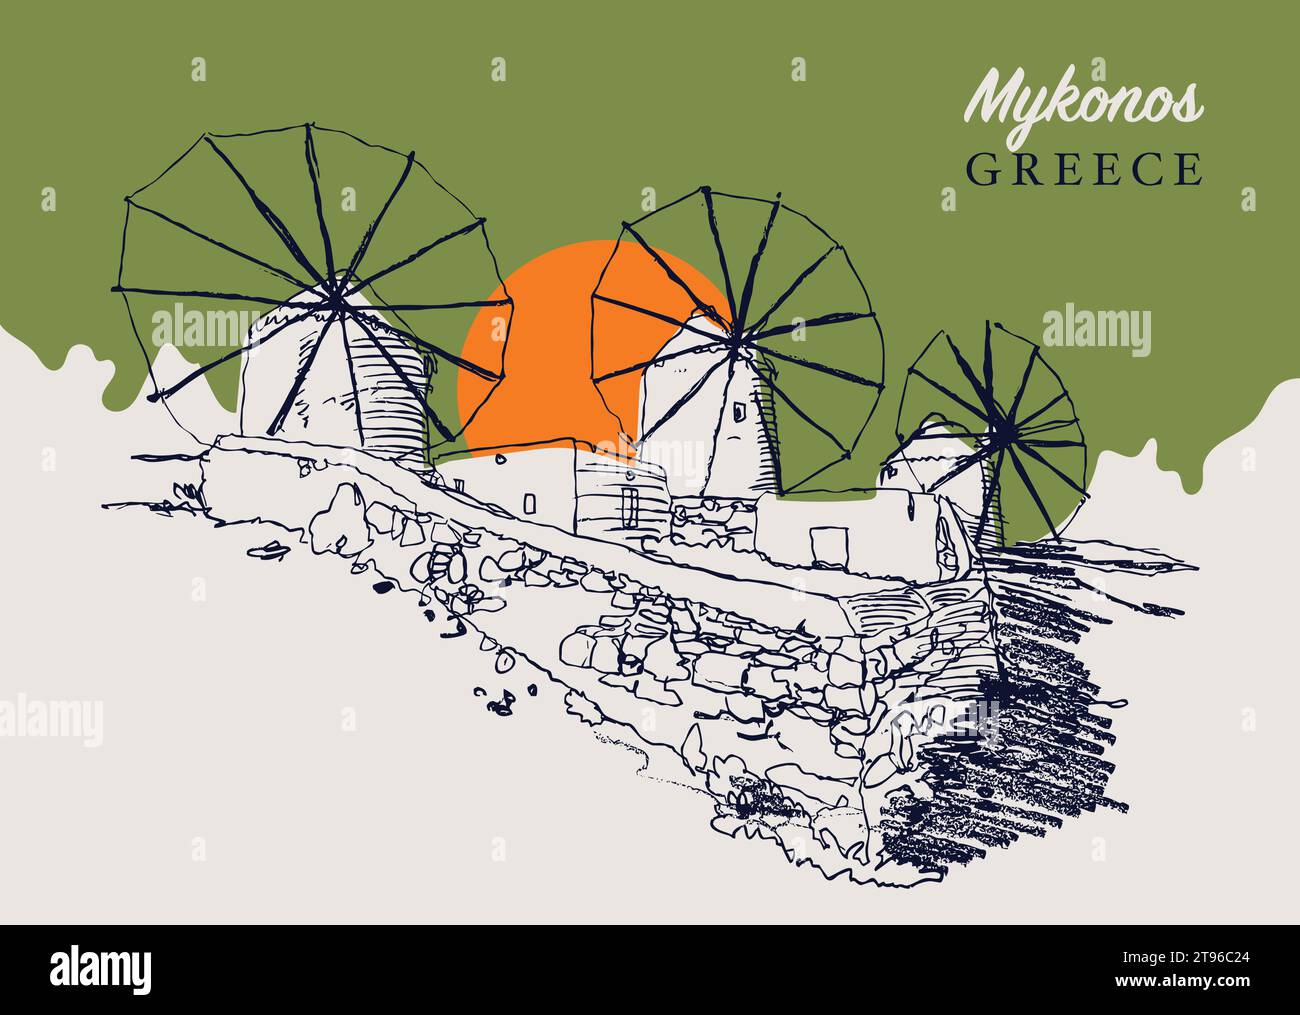 Vector hand drawn sketch illustration of the traditional Aegean windmills in the Greek island of Mykonos. Stock Vector